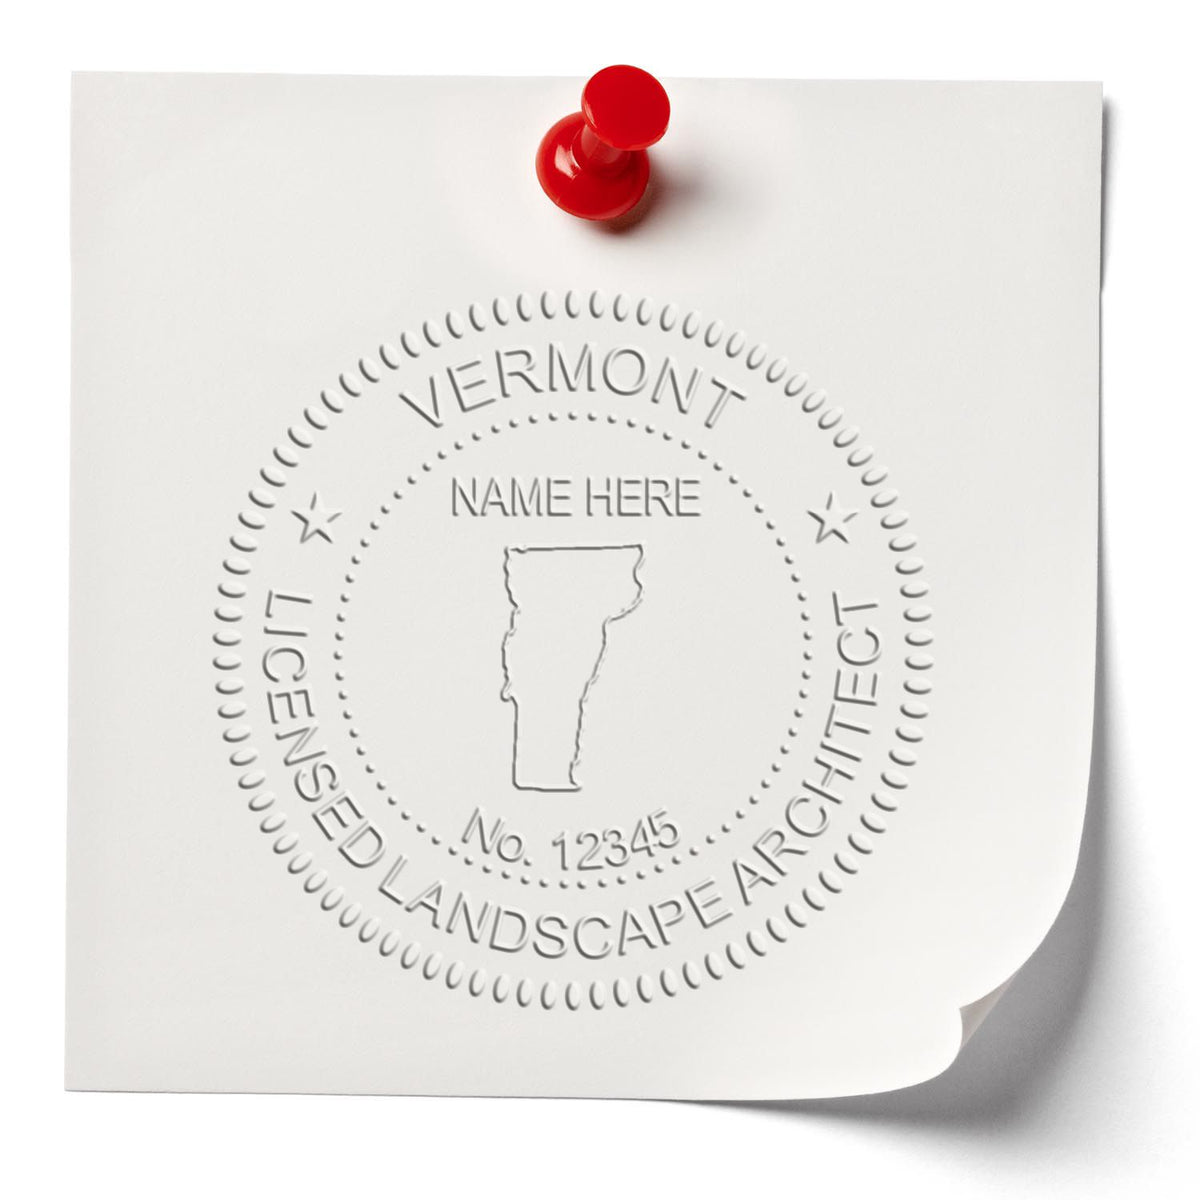 A stamped imprint of the Gift Vermont Landscape Architect Seal in this stylish lifestyle photo, setting the tone for a unique and personalized product.